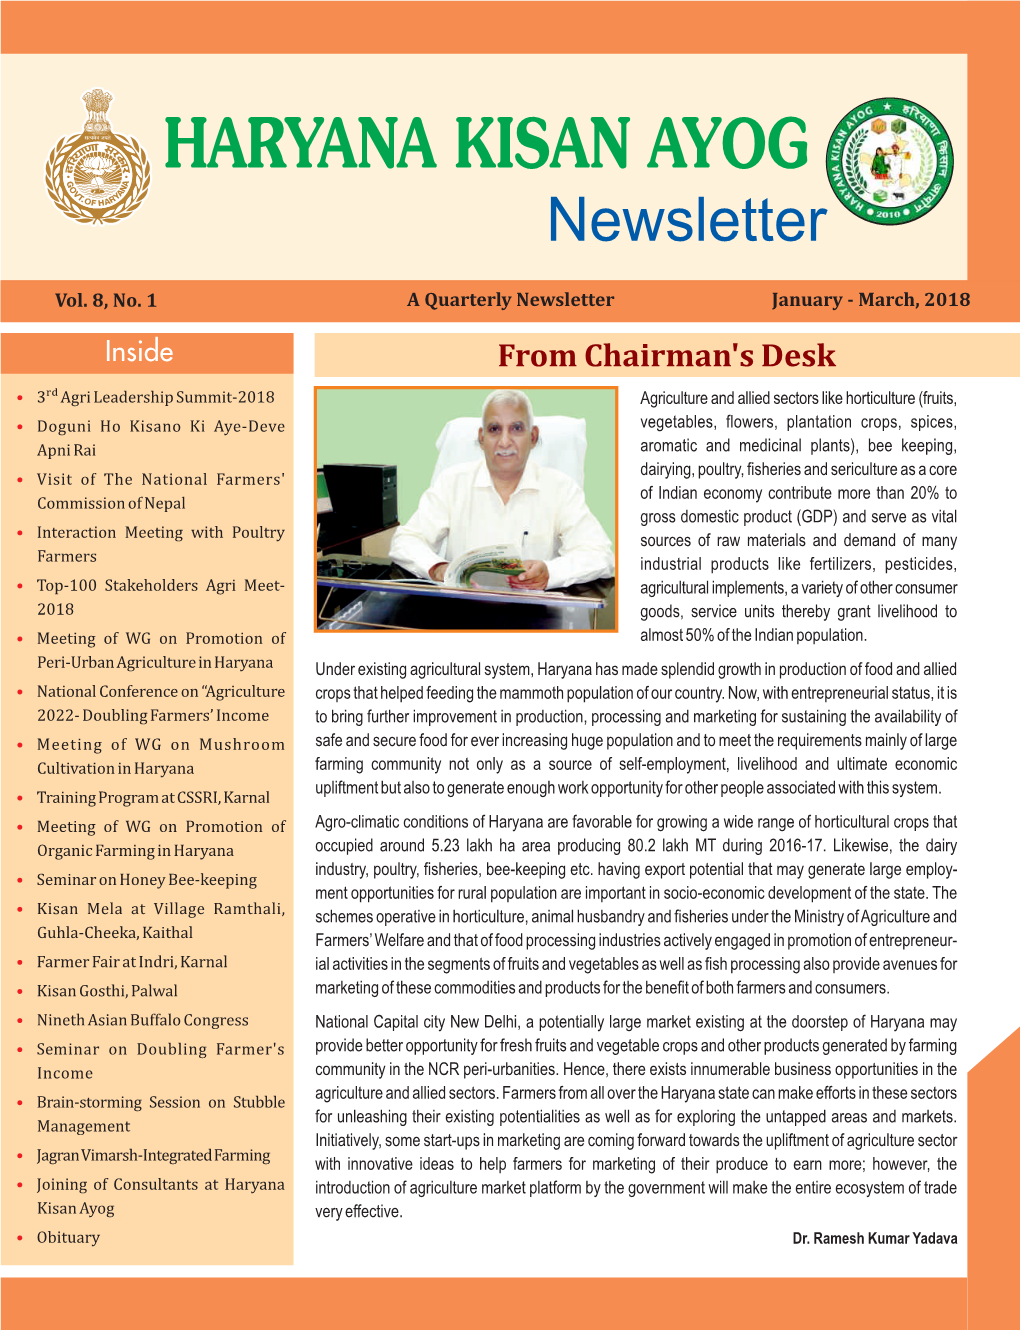 A Quarterly Newsletter January - March, 2018